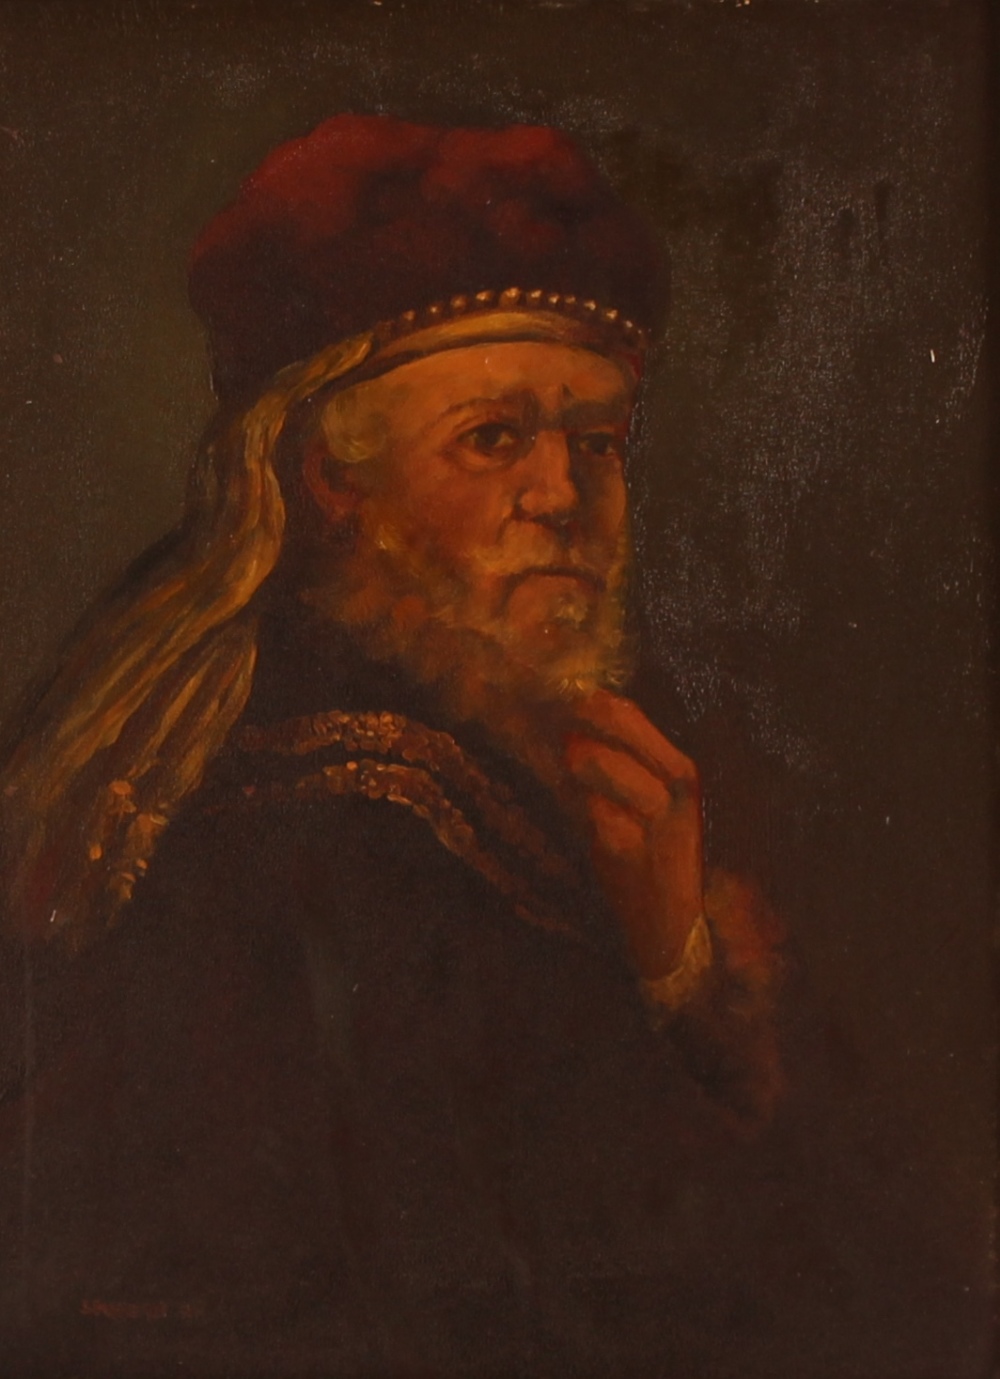 Continental school, head and shoulders portrait study of a bearded nobleman, indistinctly signed oil